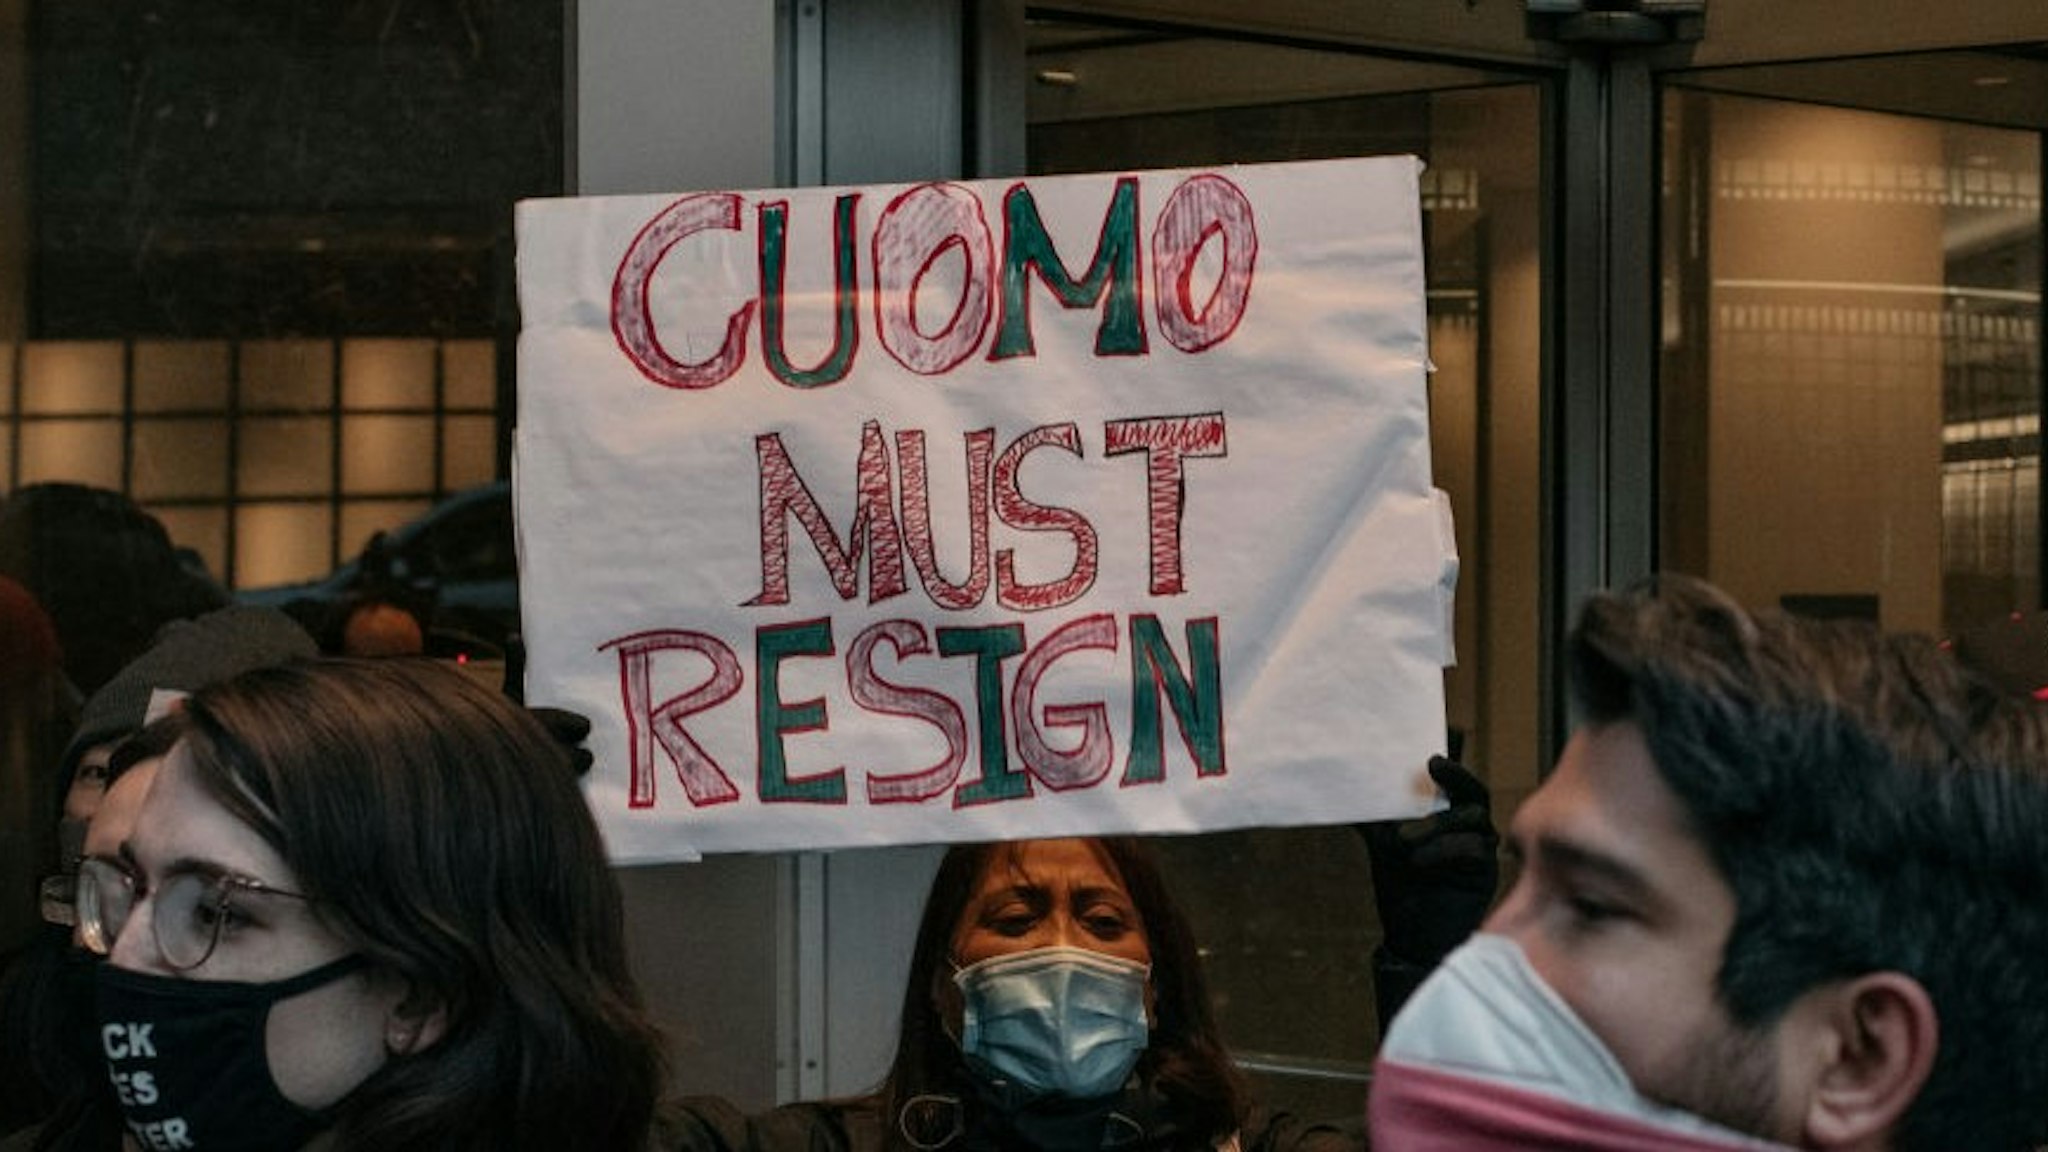 NEW YORK, NY - MARCH 02: Demonstrators call on New York Gov. Andrew Cuomo to resign at a rally on March 2, 2021 in New York City. Calls for Cuomo's impeachment or resignation have escalated in the wake of multiple women coming forward to accuse the governor of sexual harassment. (Photo by